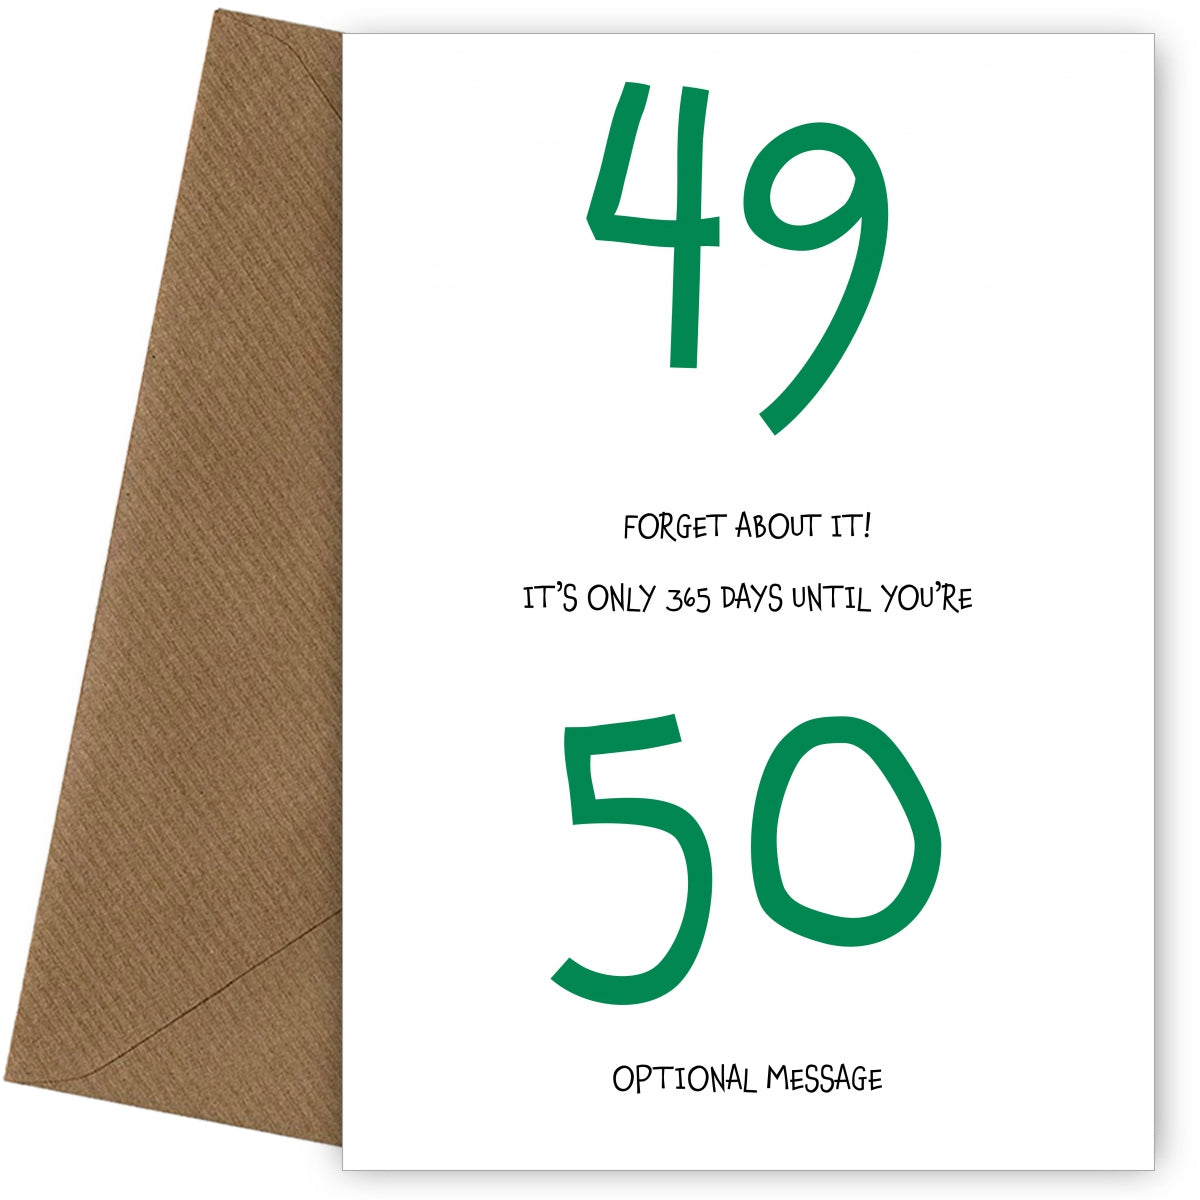 Happy 49th Birthday Card - Forget about it!